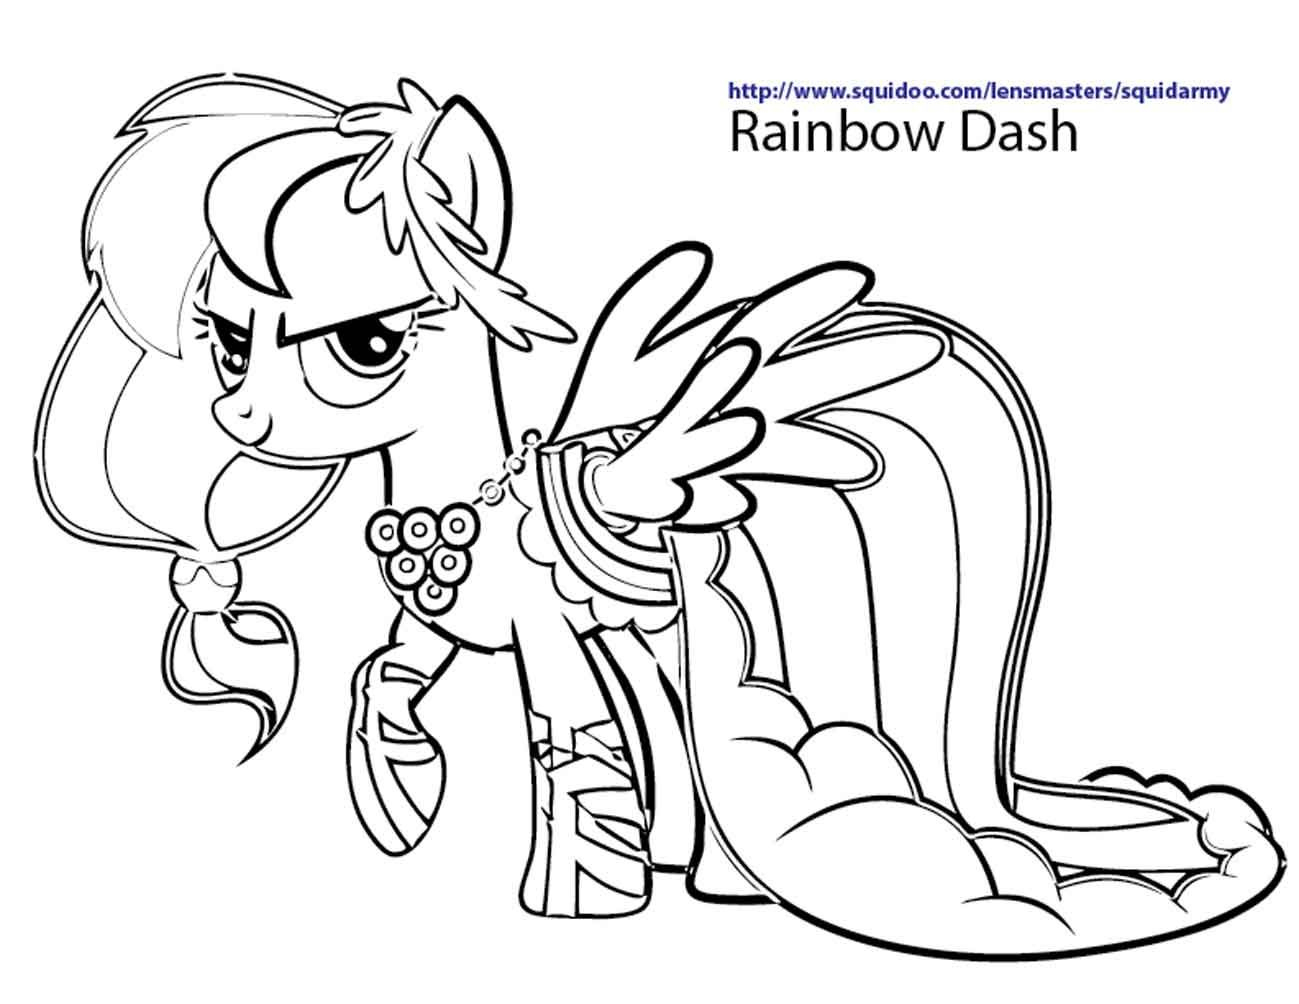 Rainbow Dash Ready For The Galloping Gala Pokemon Coloring Pages encequiconcerne Coloriage My Little Pony Rainbow Dash